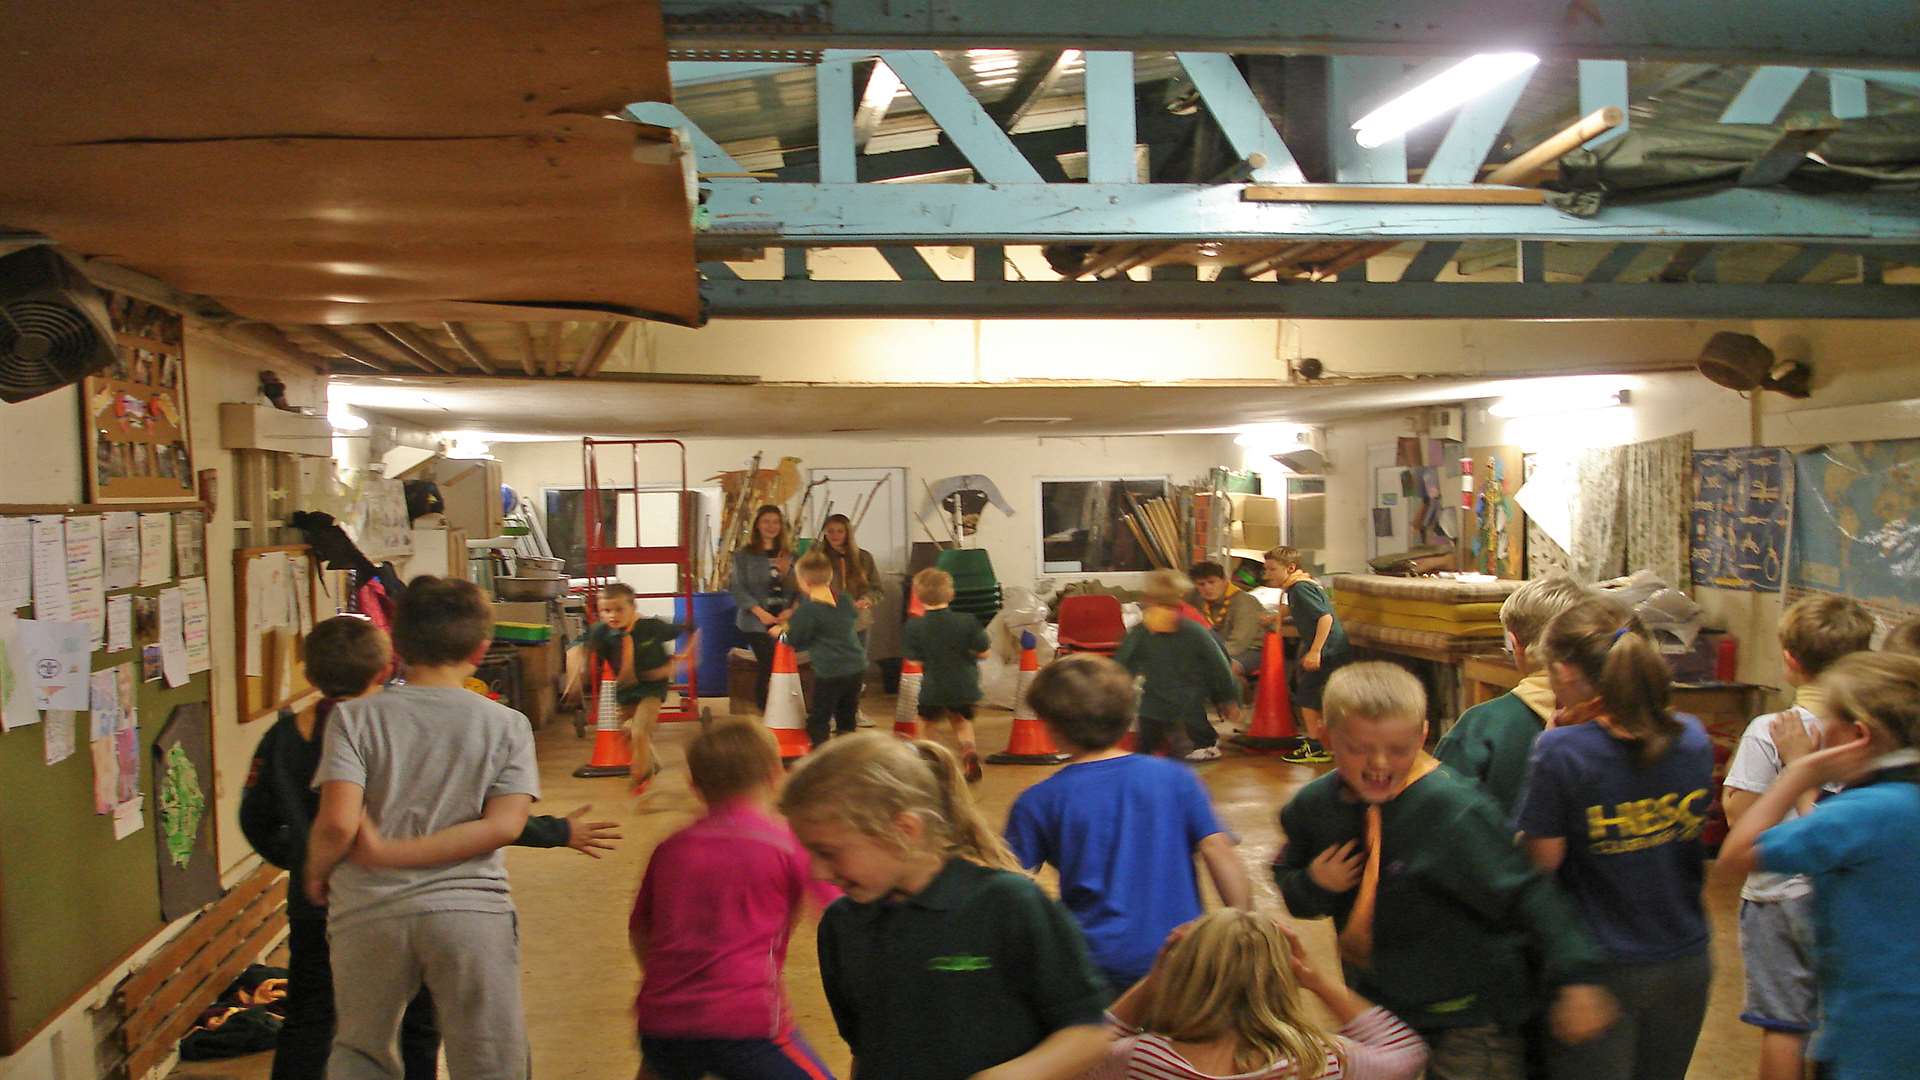 The Charing cubs playing their favourite game...a relay avoiding the leaky roof...